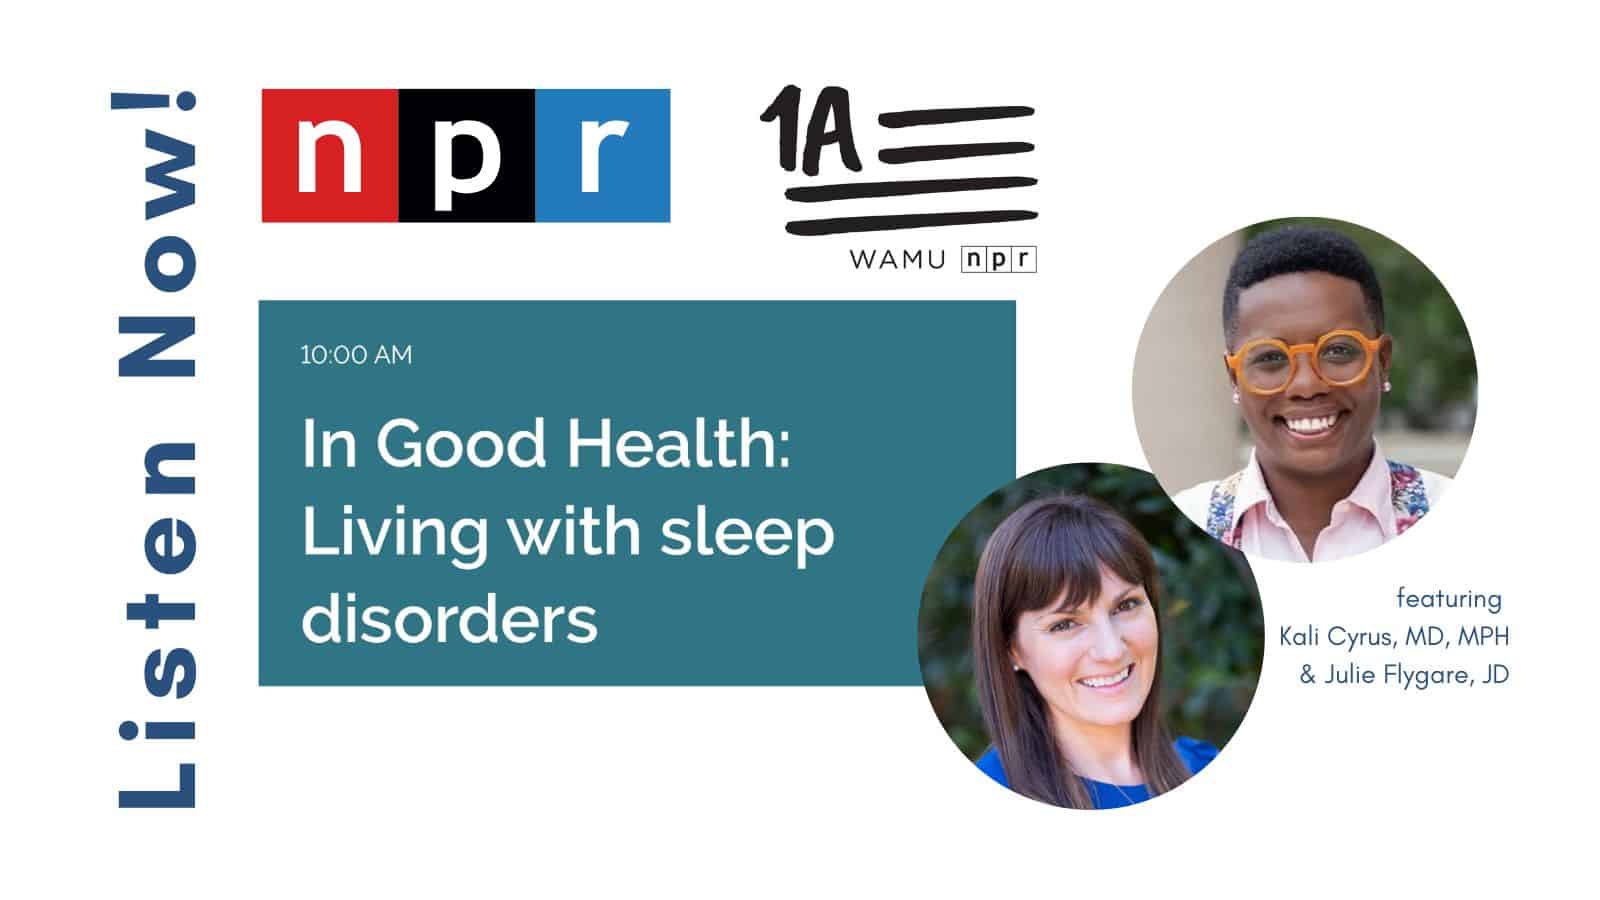 "In Good Health: Living with sleep disorders" segment by NPR show featuring Julie Flygare and Kali Cyrus.